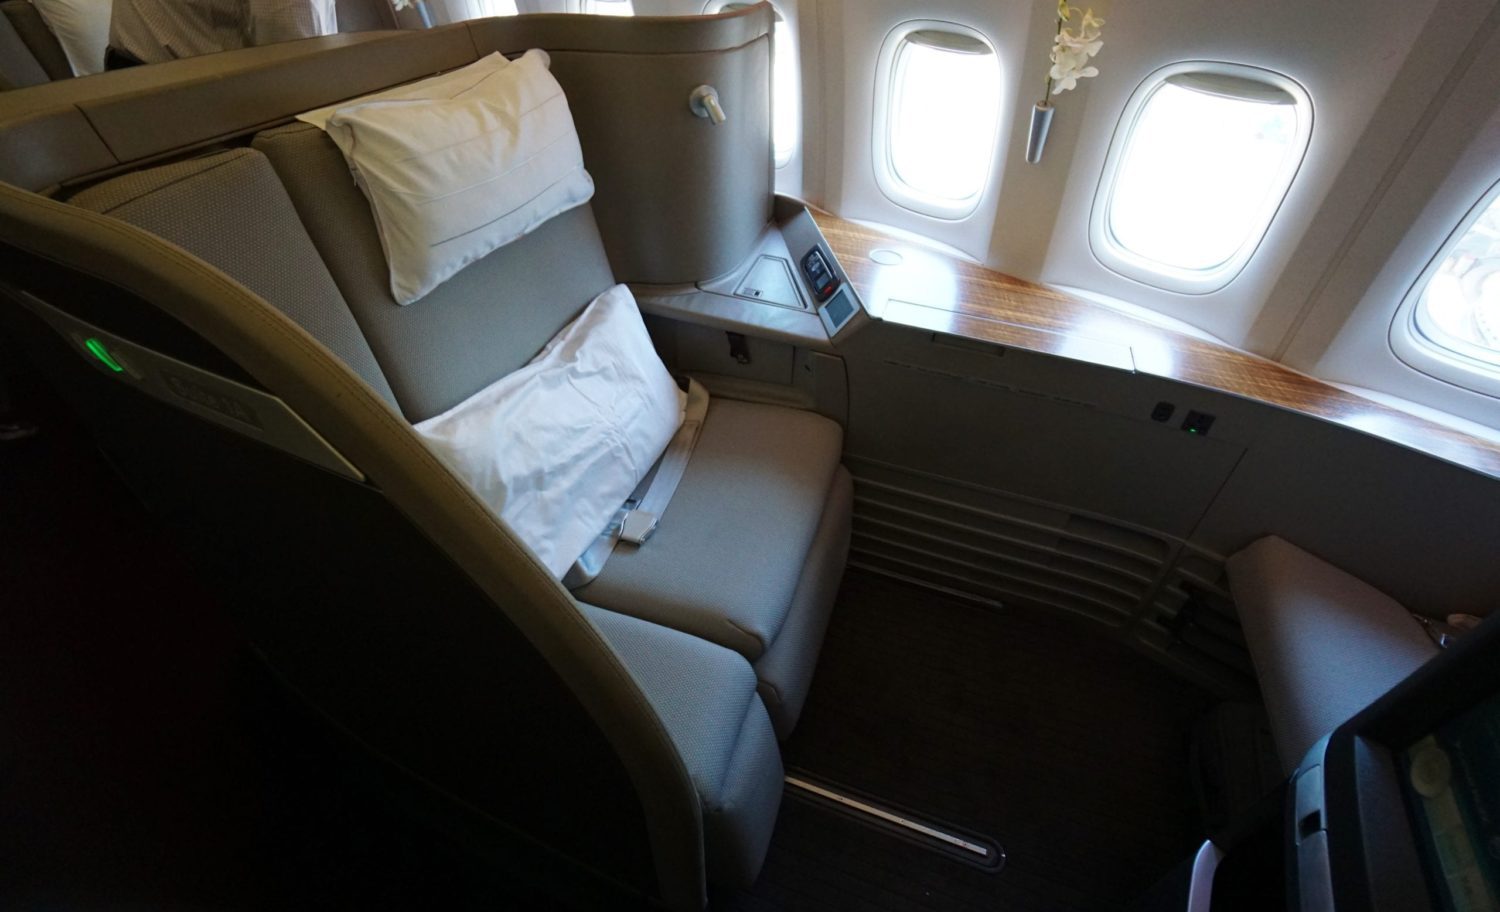 Cathay Pacific AA miles